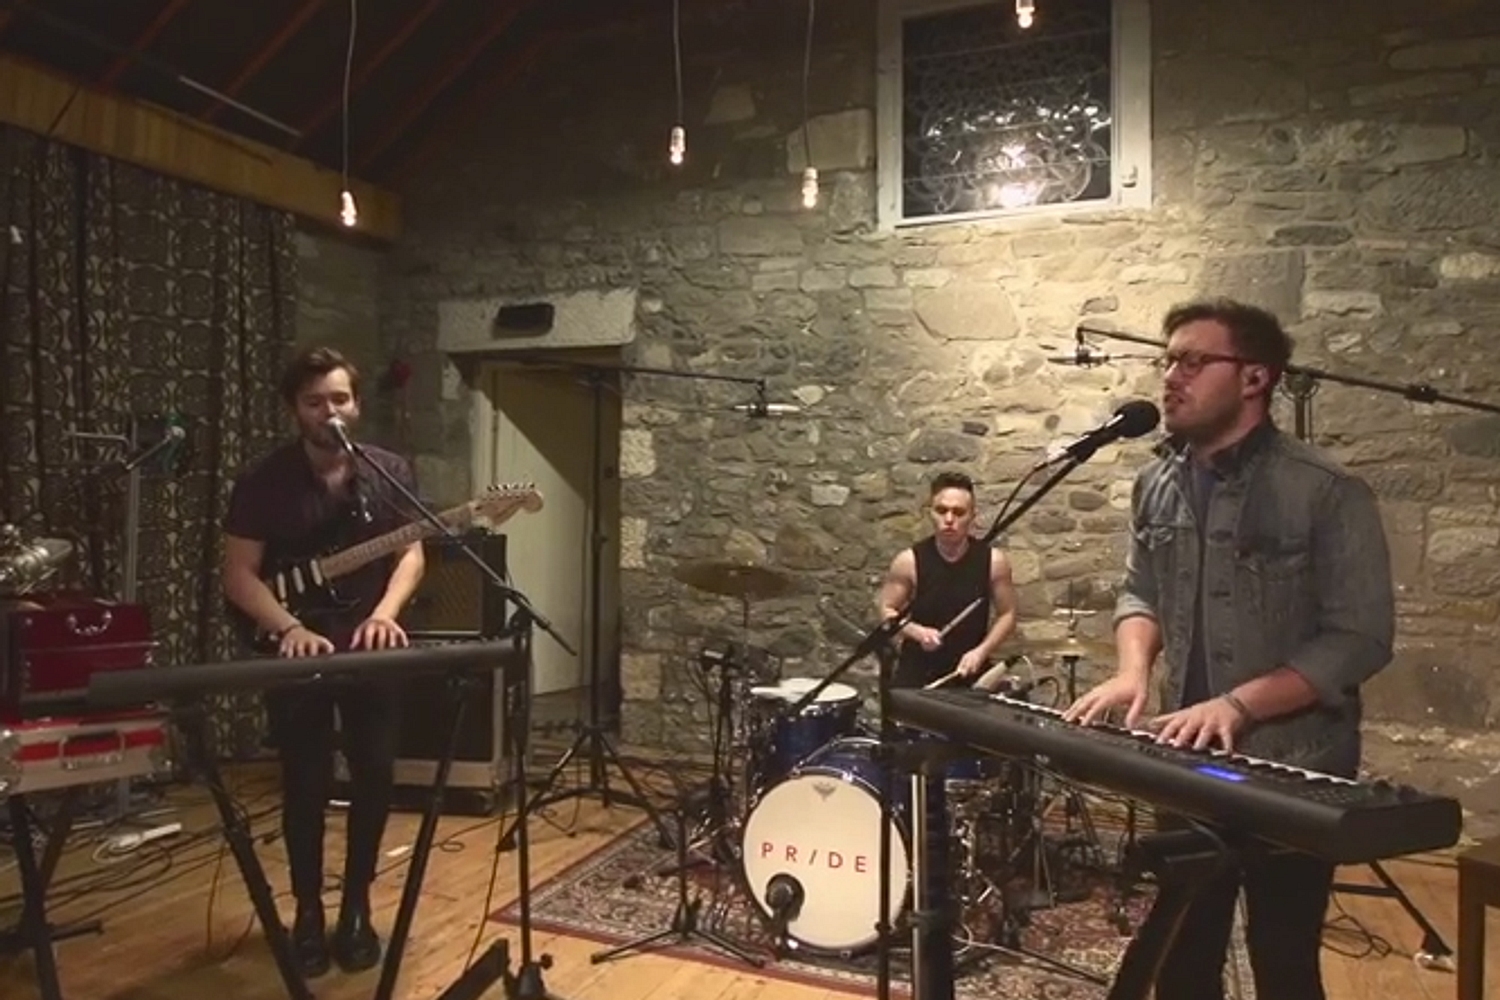 Prides share ‘live mixtape’, cover Taylor Swift, Sam Smith and more